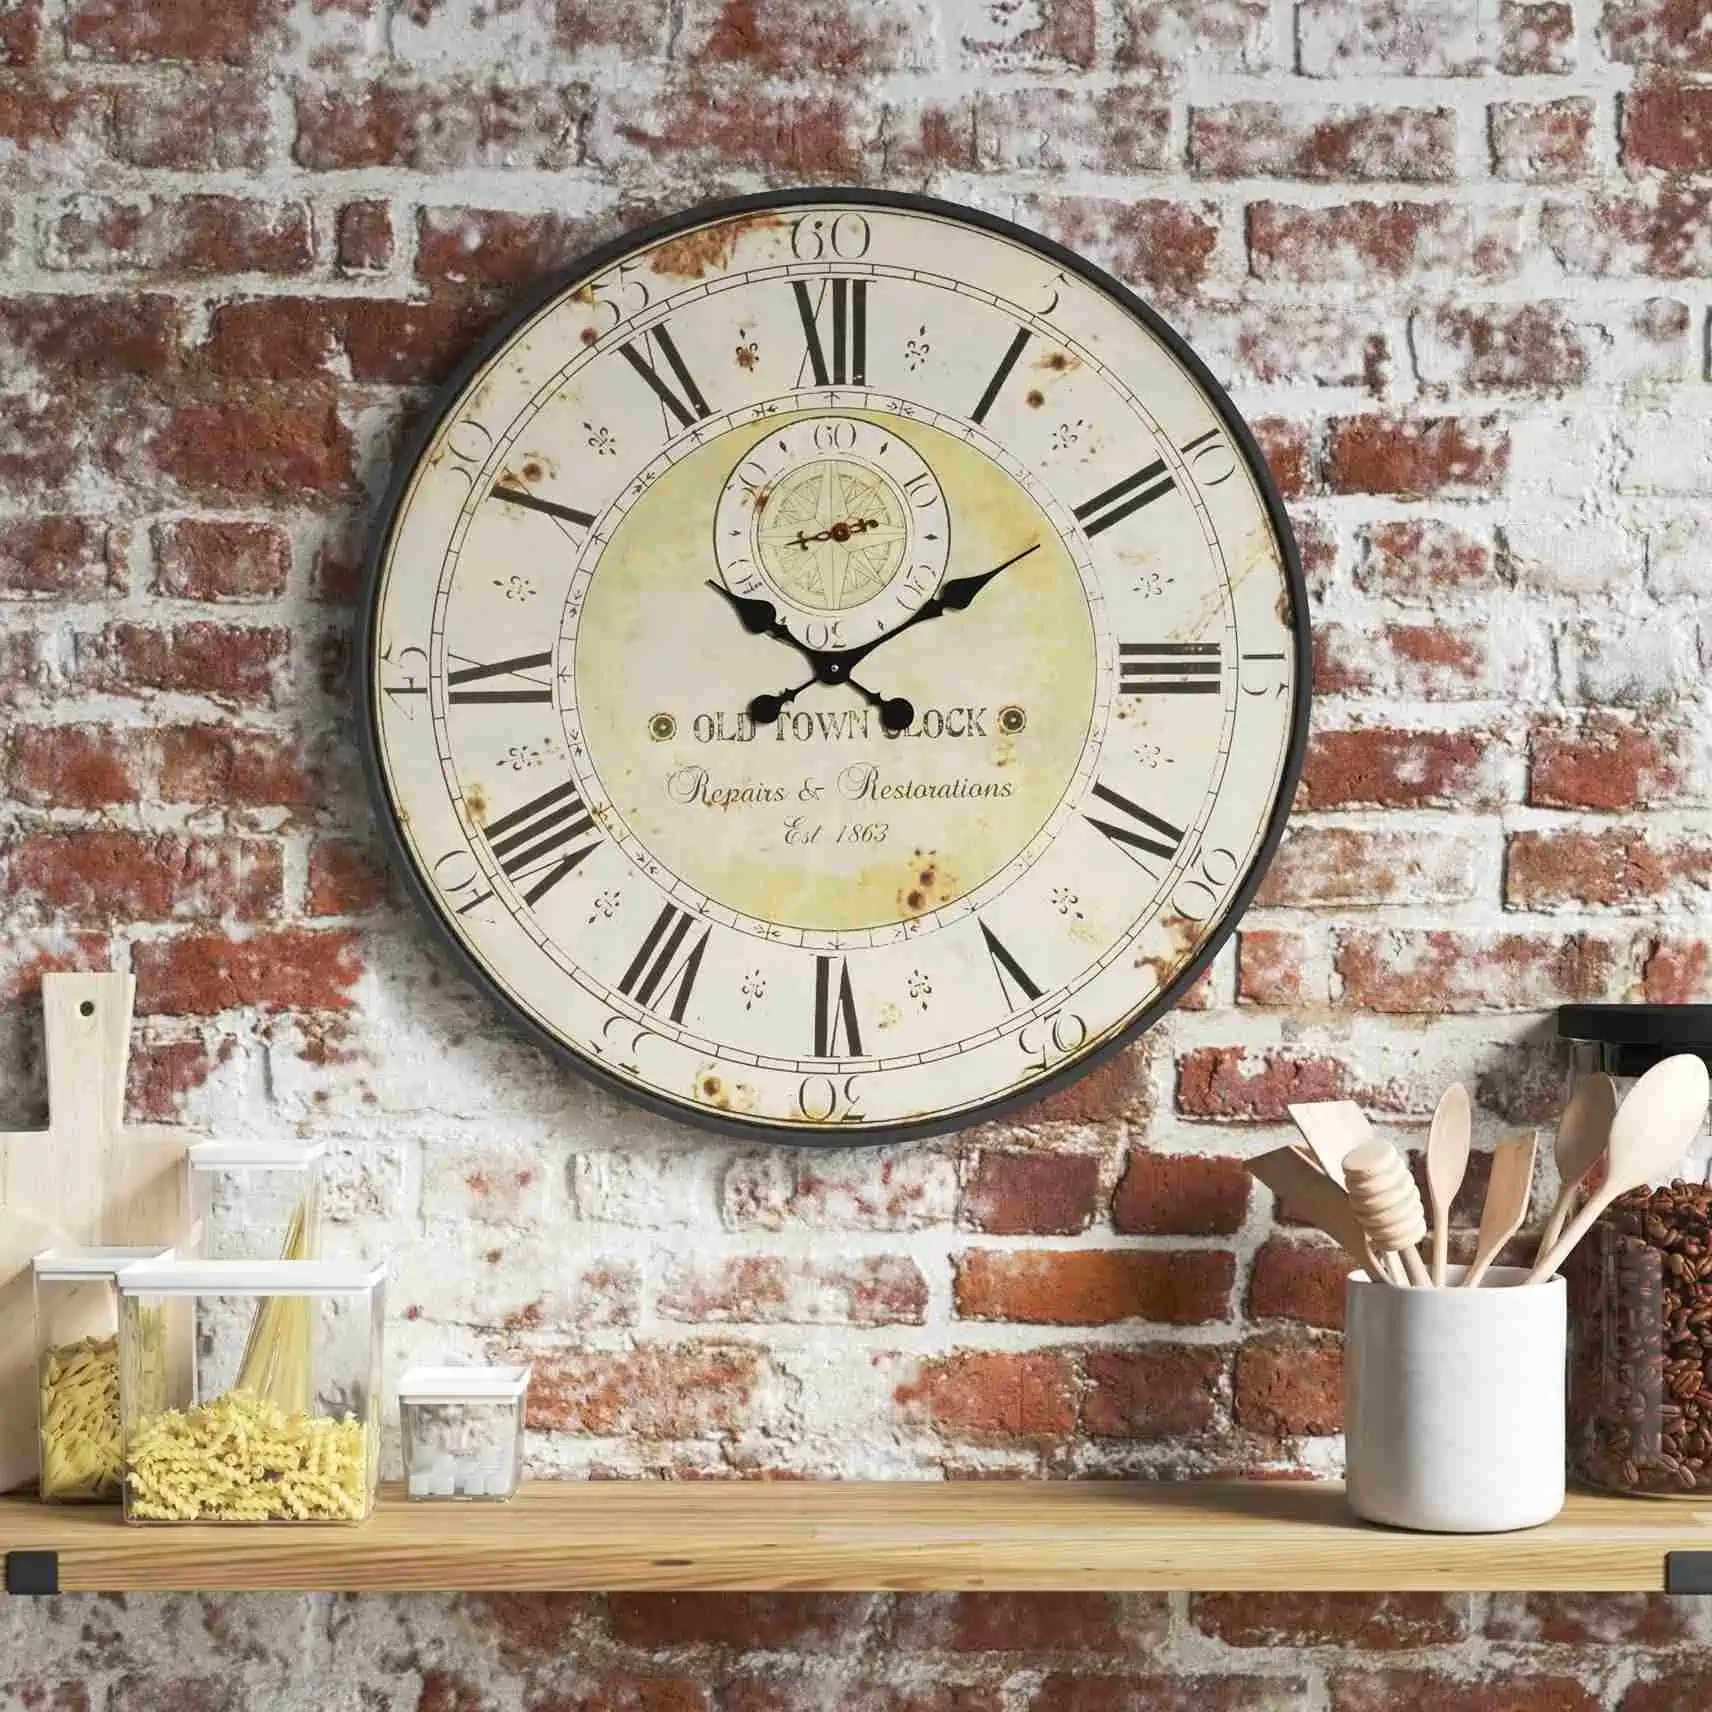 statement wall clock on a grey wall and wooden table ideas for wall decoration in living room